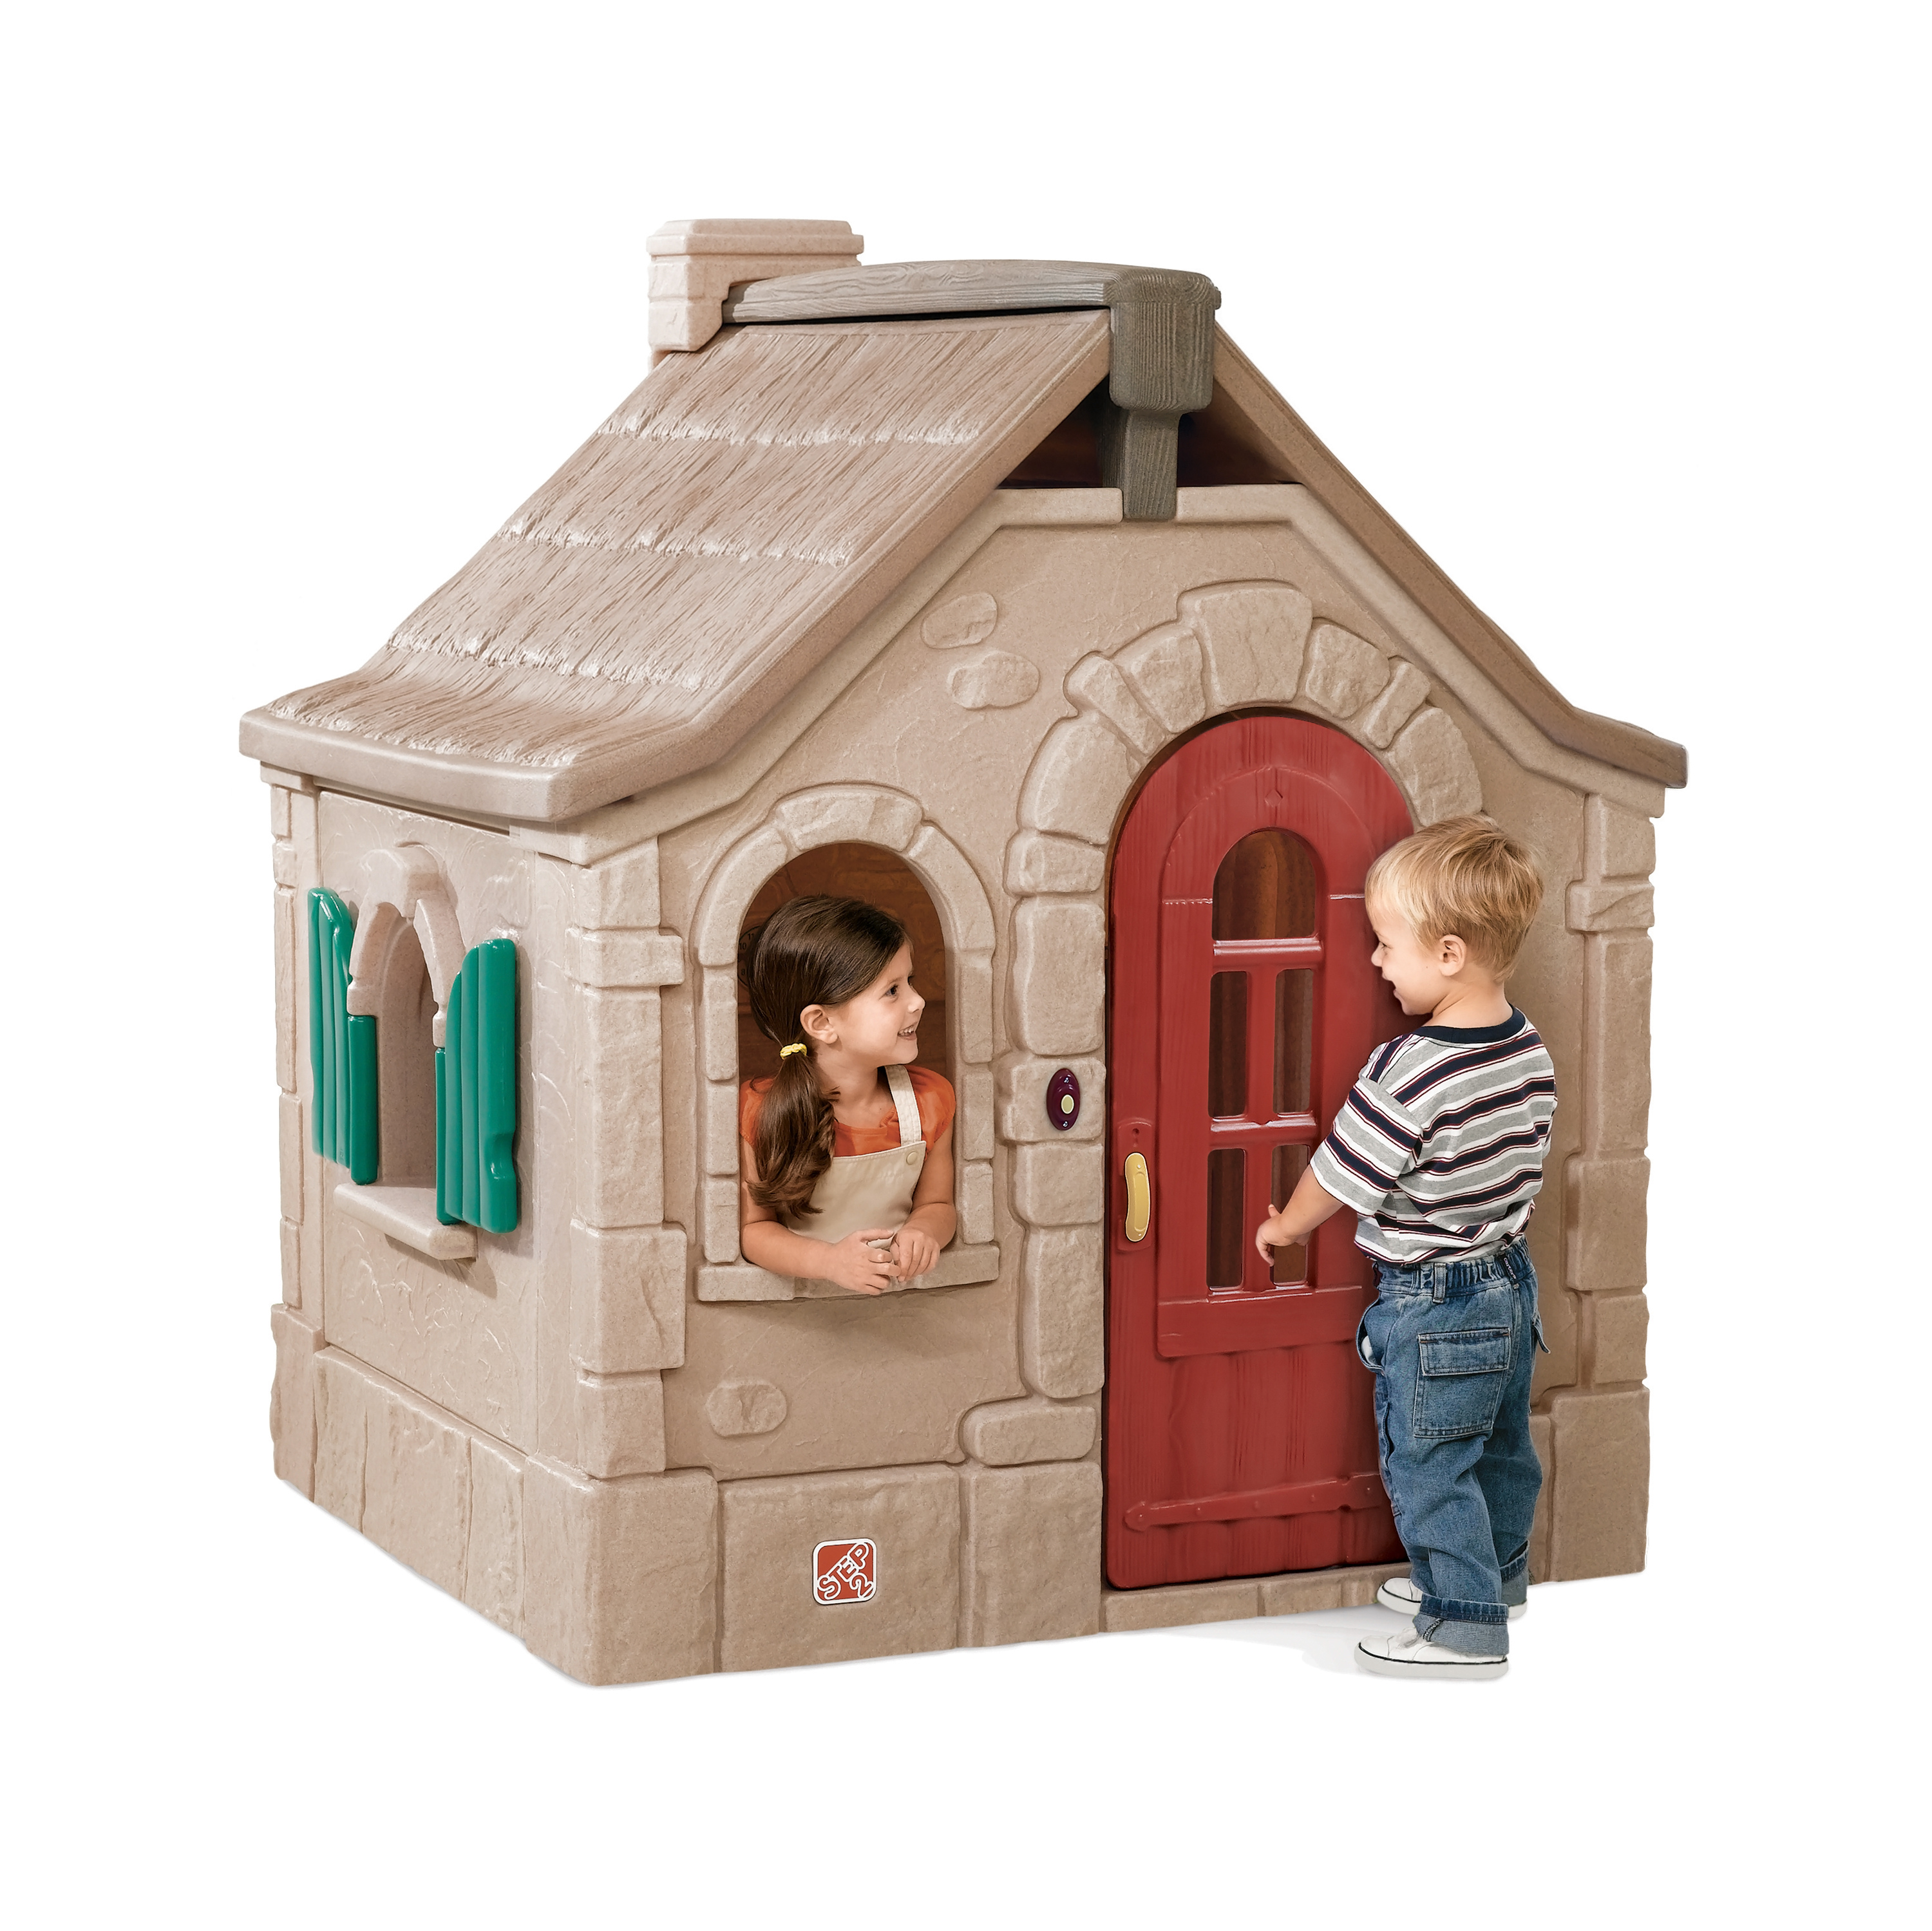 Step2 Naturally Playful Storybook Brown Cottage Playhouse Plastic Kids Outdoor Toy - image 2 of 5